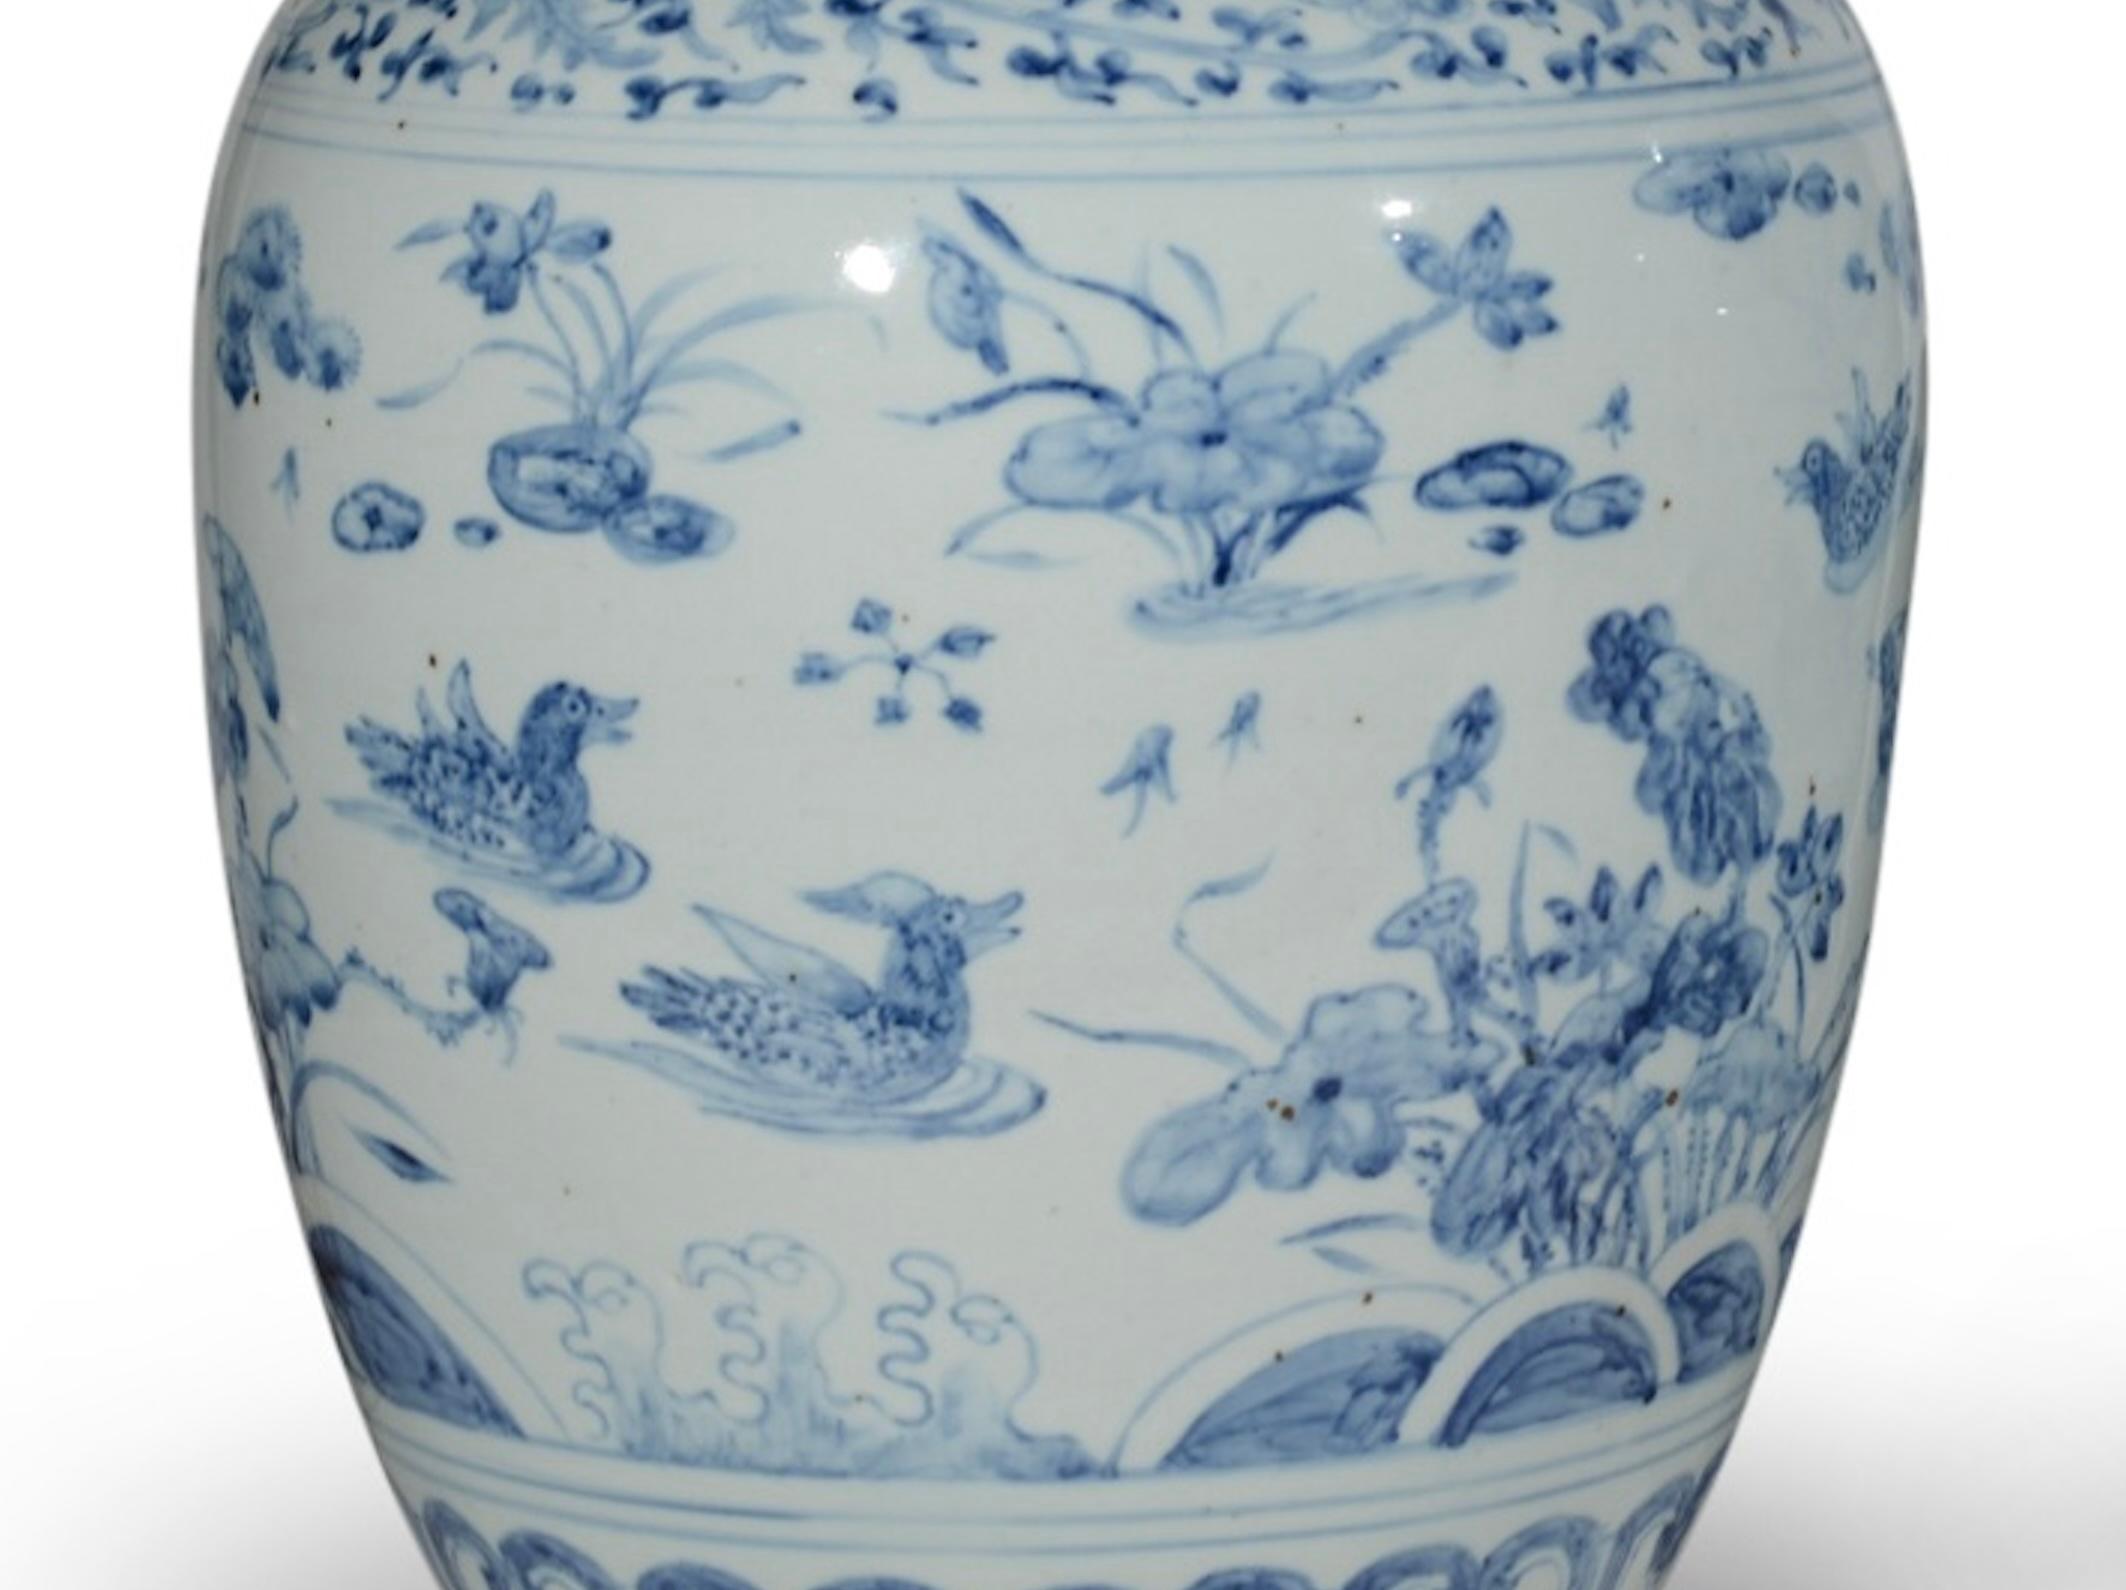 A fine Chinese blue and white vase, decorated in the Kangxi style, with ducks swimming in a watery landscape. Now mounted as a lamp with hand gilded turned base.

Height of vase: 15 1/2 in (39 cm) including gilt base, excluding electrical fitments